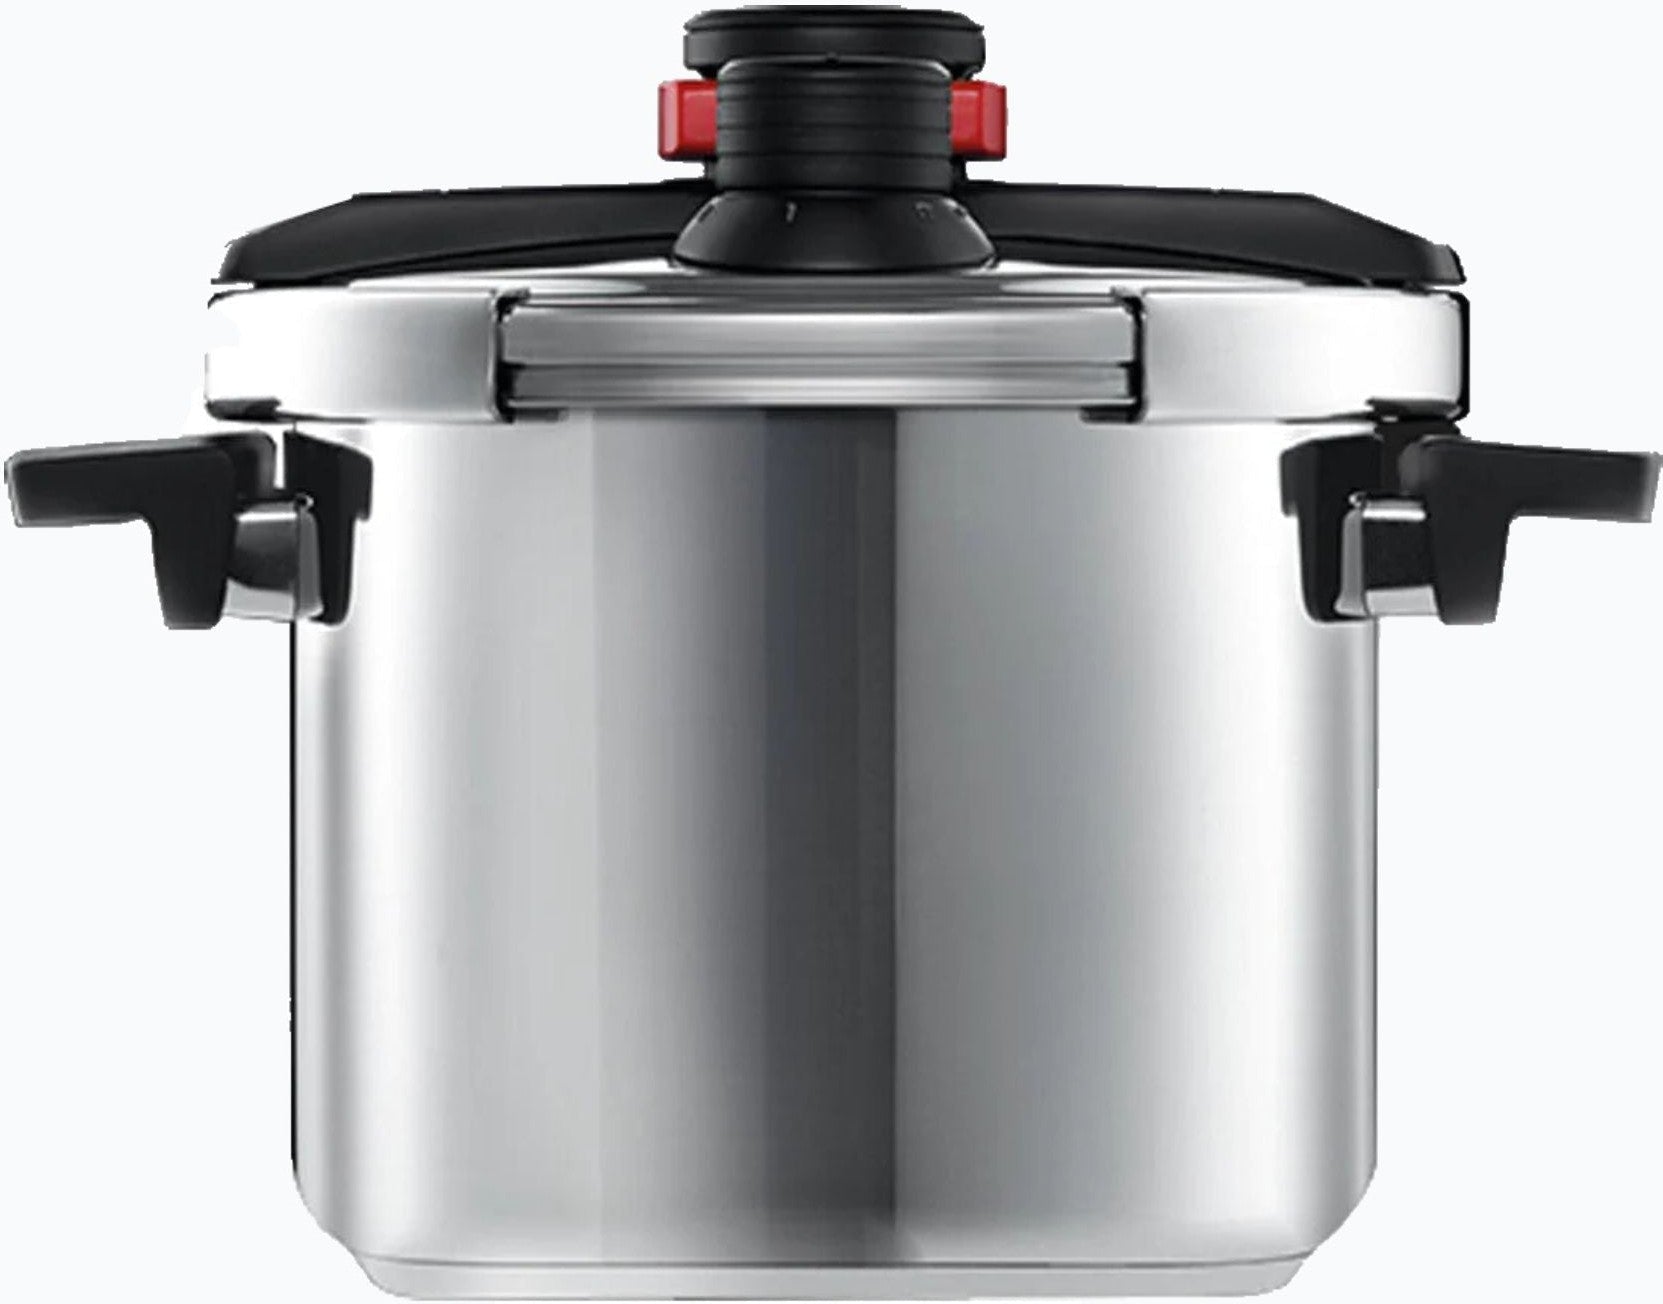 Woll Pressure Cookers